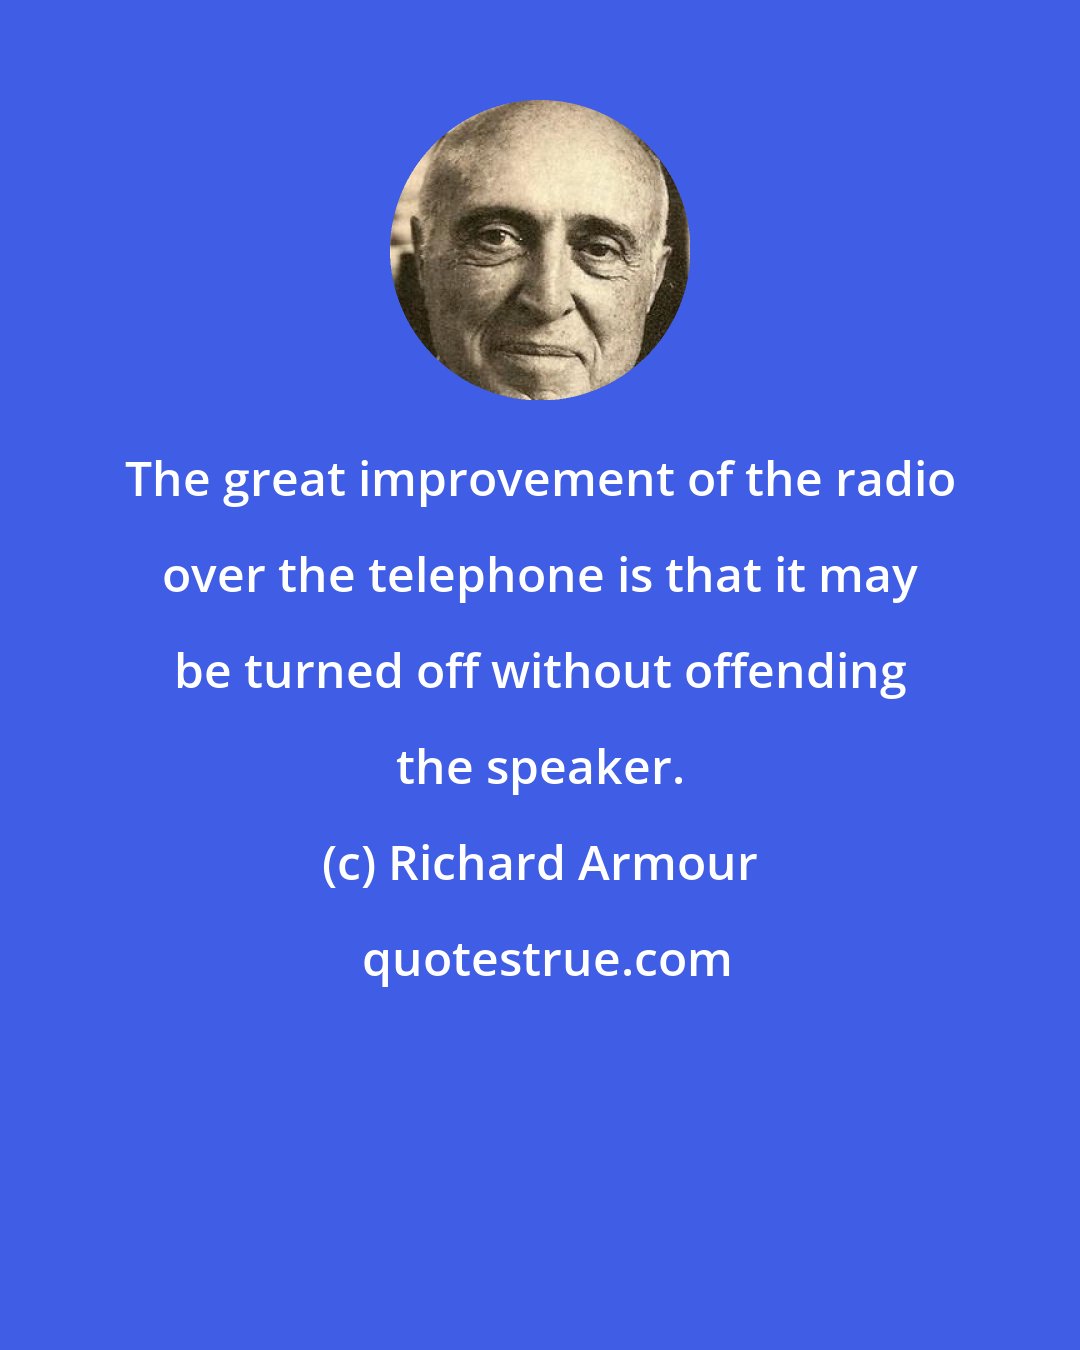 Richard Armour: The great improvement of the radio over the telephone is that it may be turned off without offending the speaker.